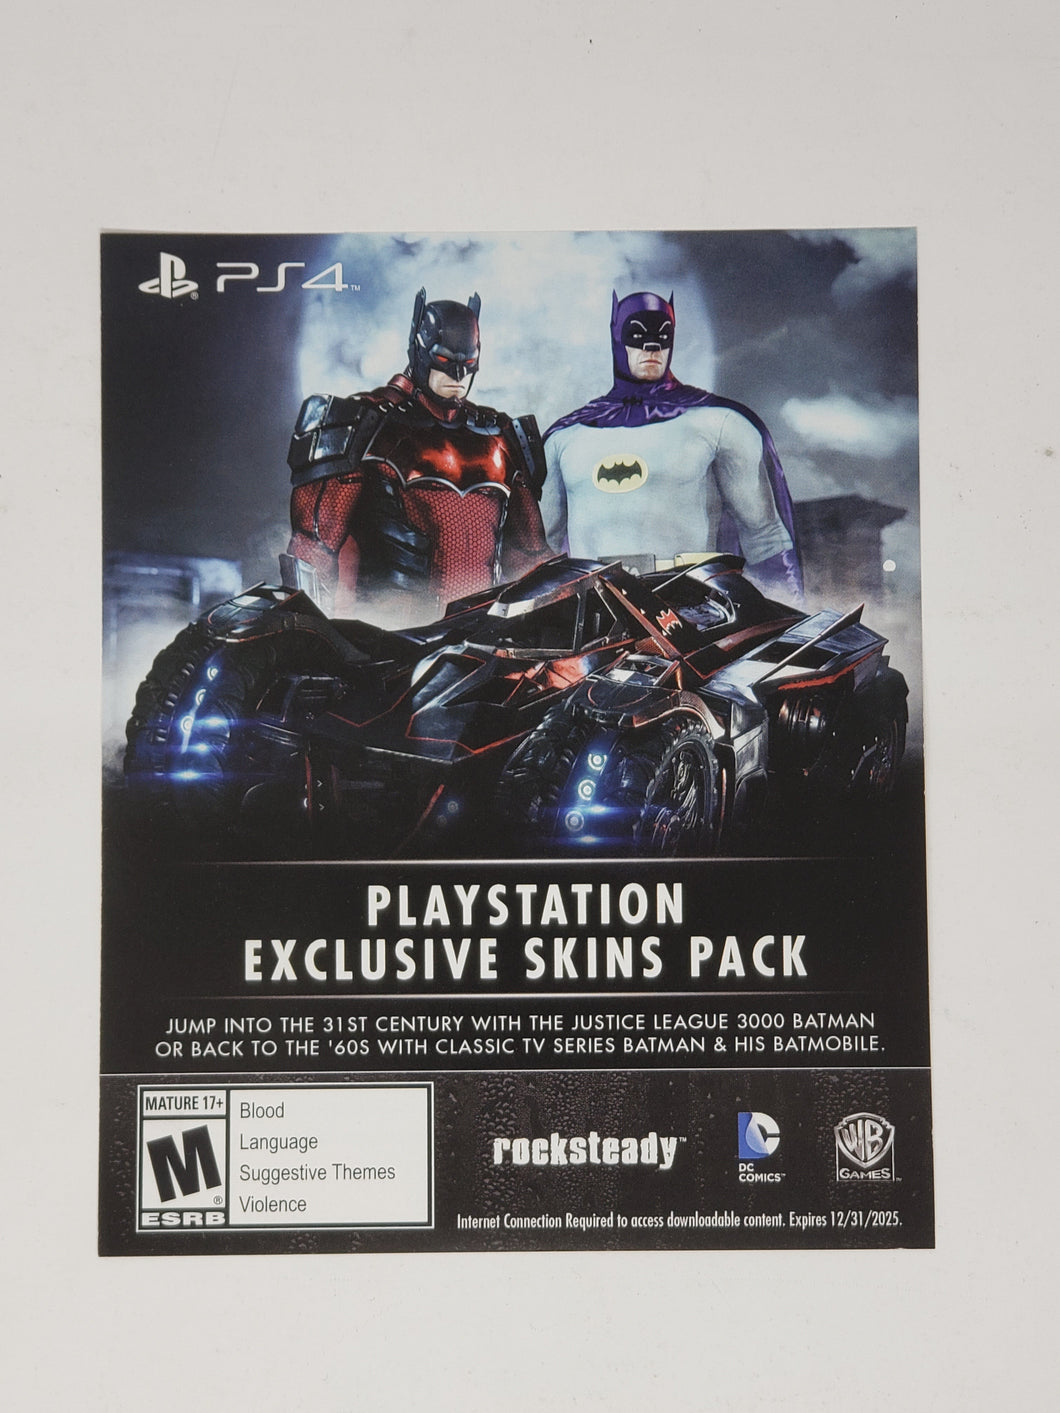 Playstation Exclusive Skins Pack [Insert] - Sony Playstation 4 | PS4